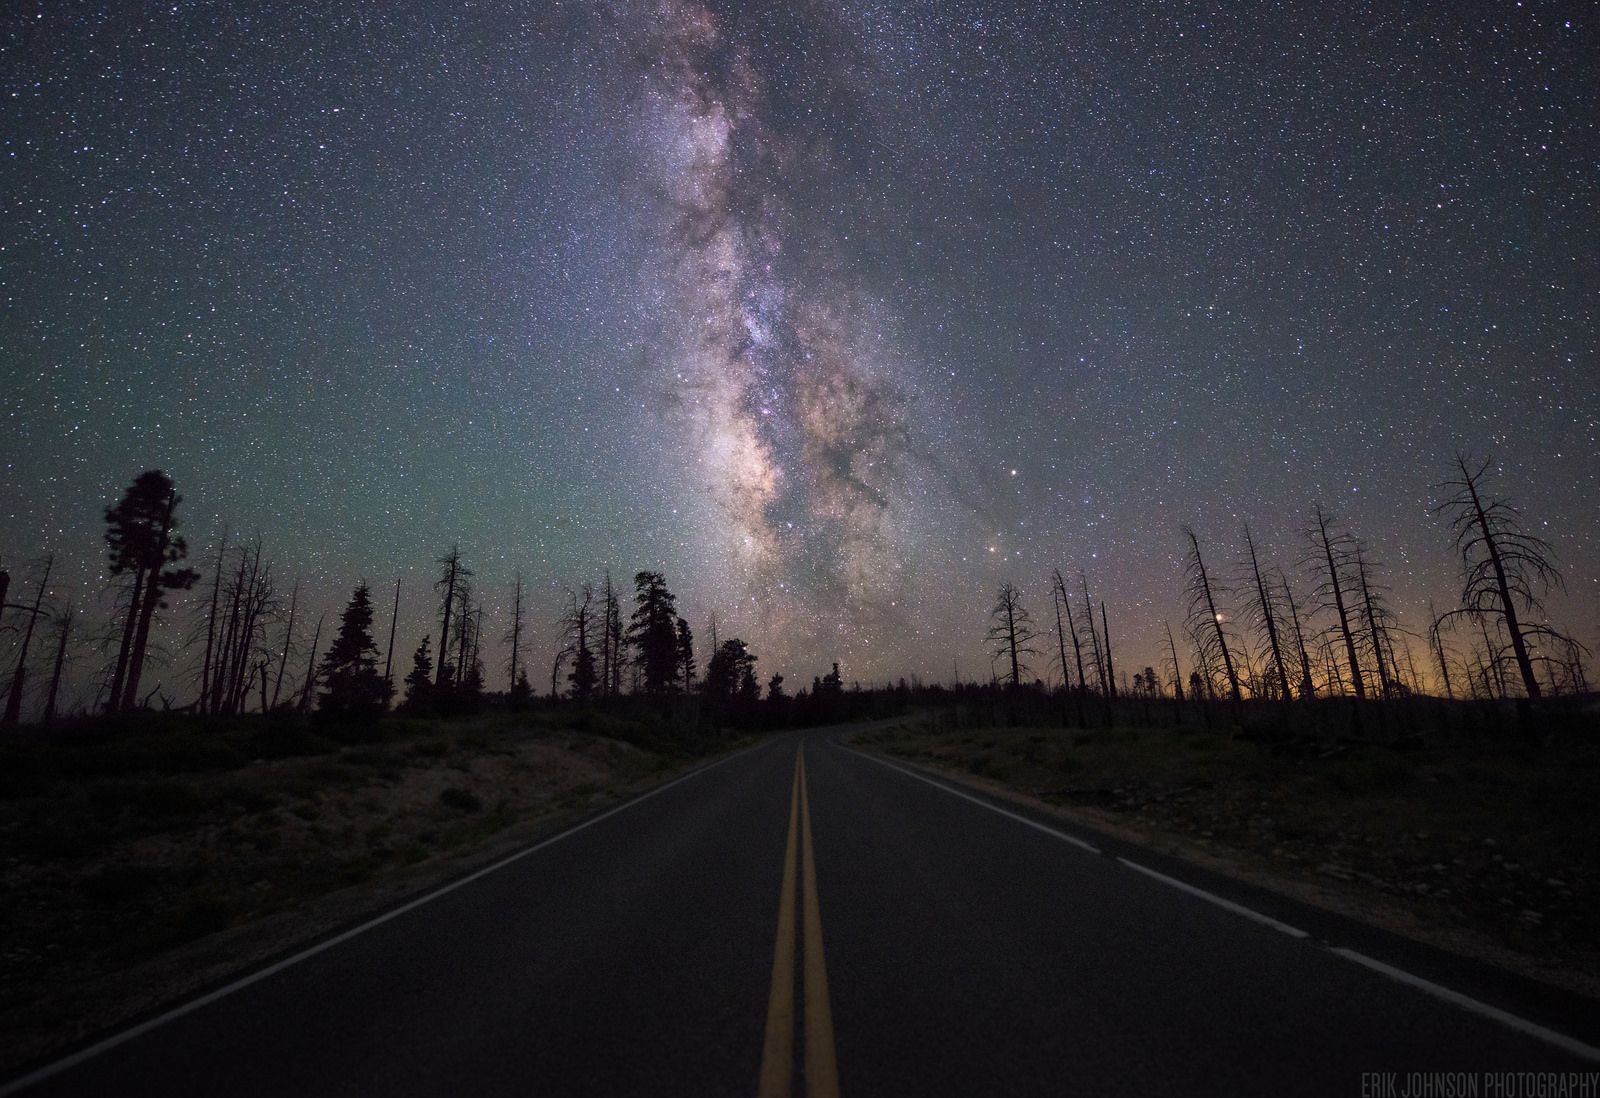 I stood here for an hour, in Mountain Lion country, waiting for the galaxy to align with the road. It was totally worth it.